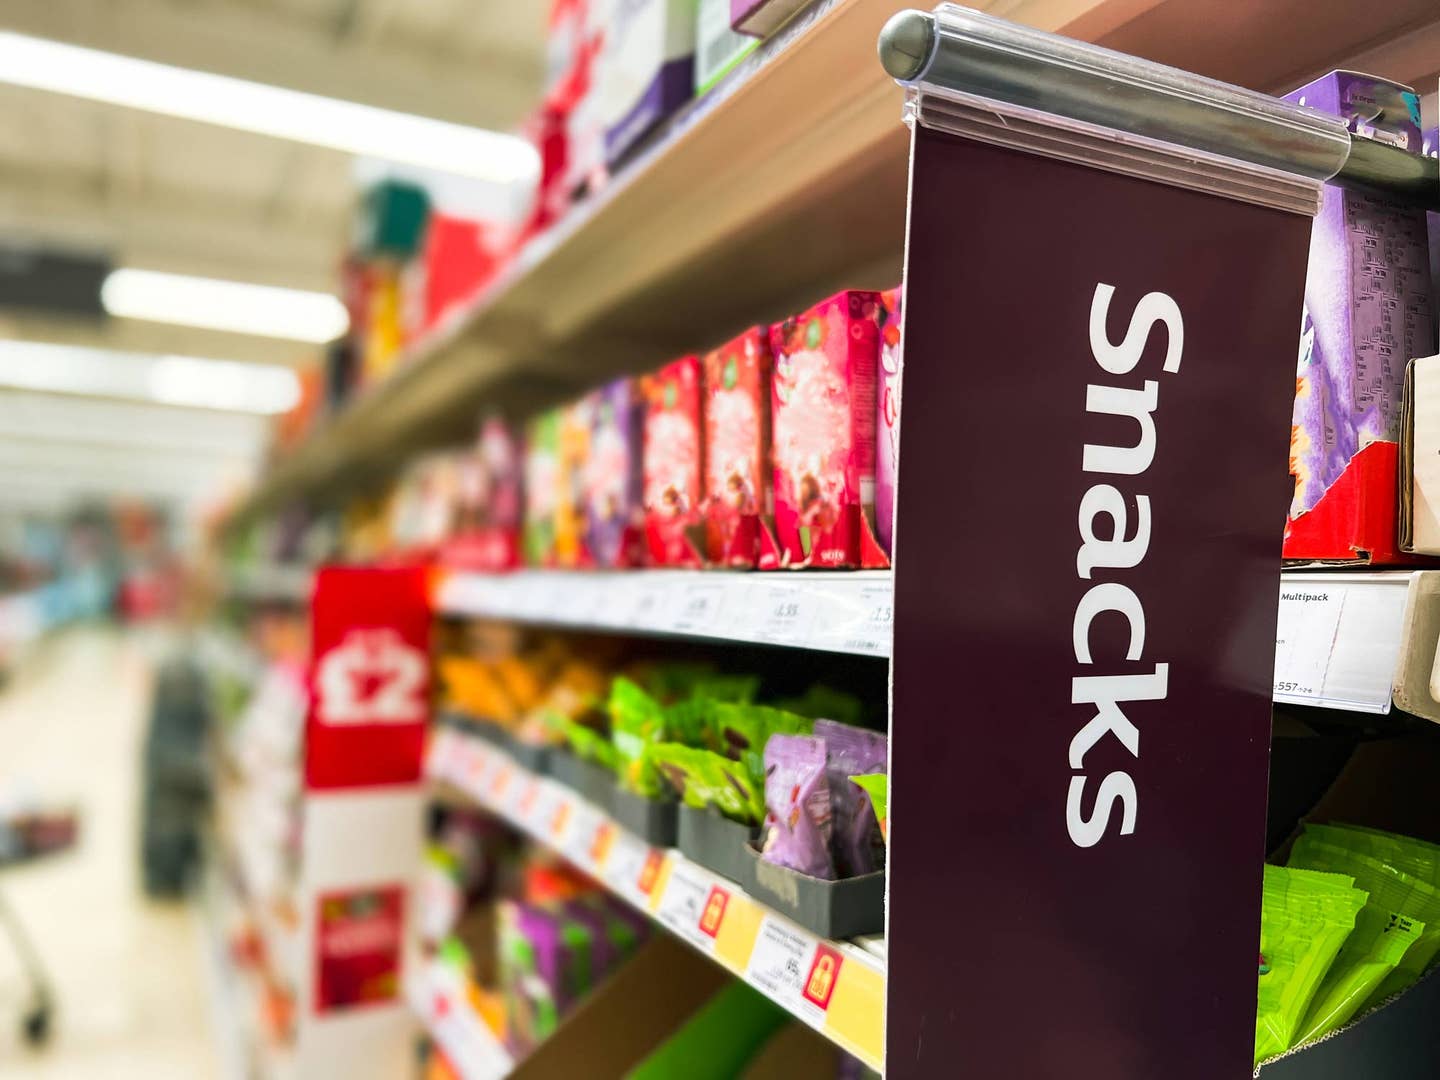 Grocery store snack aisle full of highly processed foods